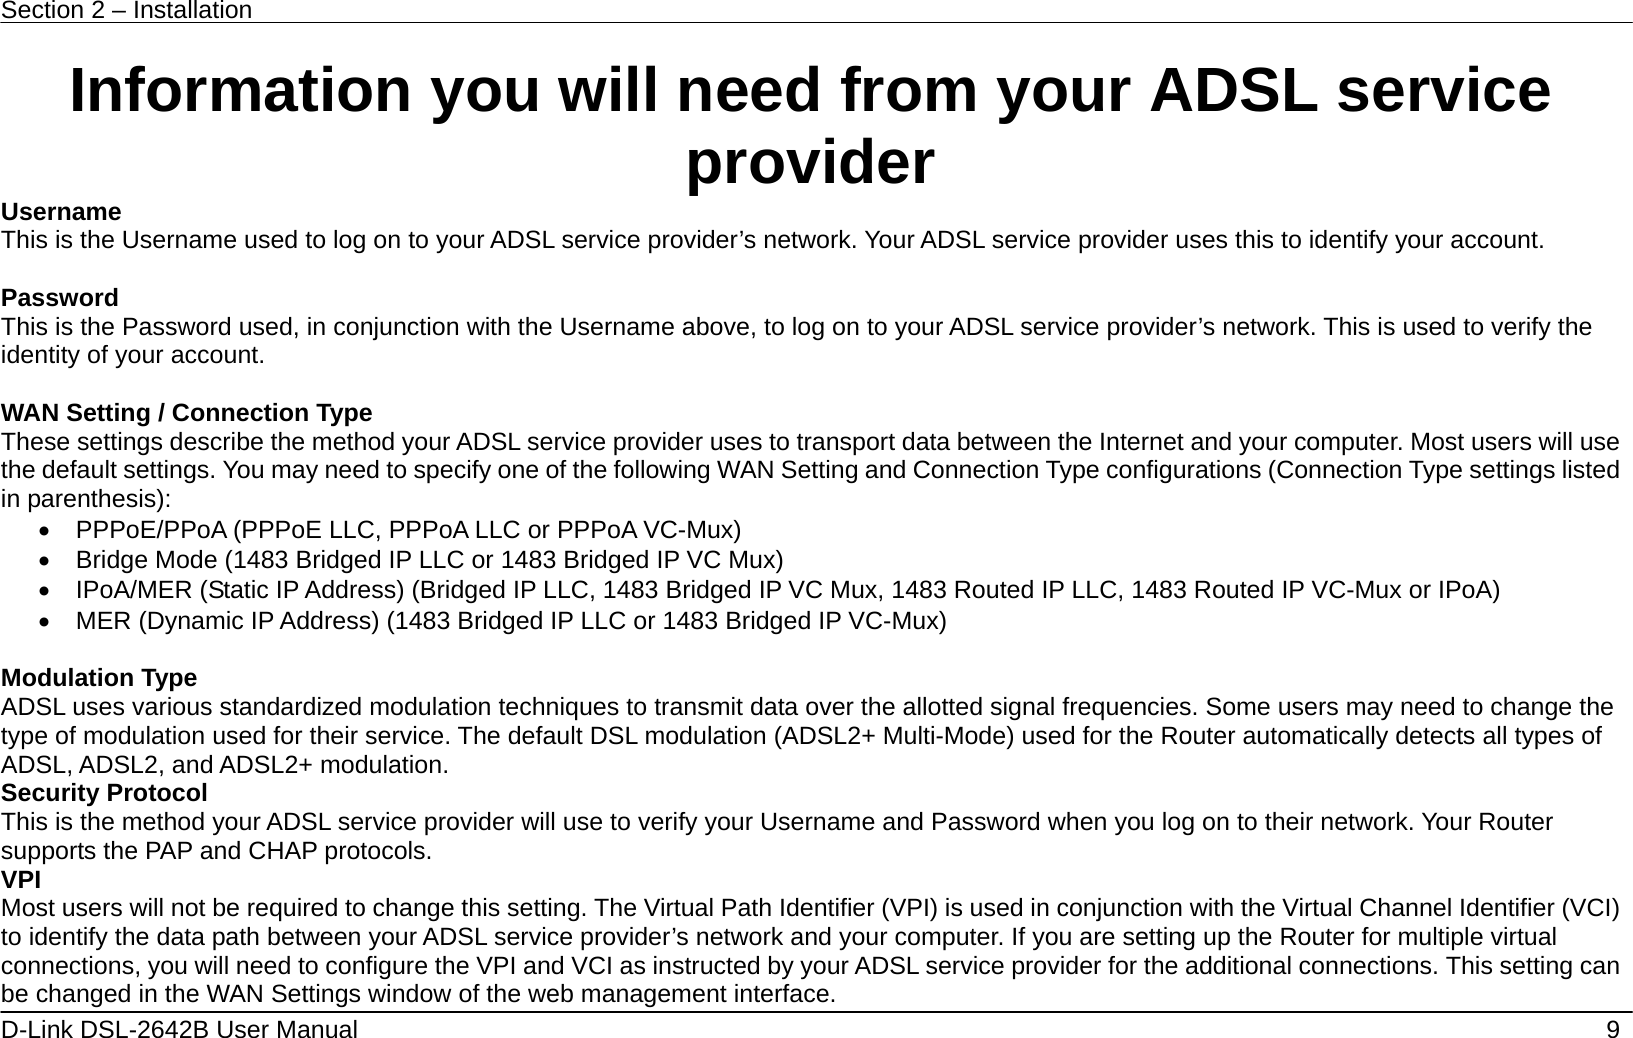 Section 2 – Installation   9 D-Link DSL-2642B User Manual   Information you will need from your ADSL service provider Username This is the Username used to log on to your ADSL service provider’s network. Your ADSL service provider uses this to identify your account.  Password This is the Password used, in conjunction with the Username above, to log on to your ADSL service provider’s network. This is used to verify the identity of your account.  WAN Setting / Connection Type These settings describe the method your ADSL service provider uses to transport data between the Internet and your computer. Most users will use the default settings. You may need to specify one of the following WAN Setting and Connection Type configurations (Connection Type settings listed in parenthesis):   •  PPPoE/PPoA (PPPoE LLC, PPPoA LLC or PPPoA VC-Mux) •  Bridge Mode (1483 Bridged IP LLC or 1483 Bridged IP VC Mux) •  IPoA/MER (Static IP Address) (Bridged IP LLC, 1483 Bridged IP VC Mux, 1483 Routed IP LLC, 1483 Routed IP VC-Mux or IPoA) •  MER (Dynamic IP Address) (1483 Bridged IP LLC or 1483 Bridged IP VC-Mux)      Modulation Type ADSL uses various standardized modulation techniques to transmit data over the allotted signal frequencies. Some users may need to change the type of modulation used for their service. The default DSL modulation (ADSL2+ Multi-Mode) used for the Router automatically detects all types of ADSL, ADSL2, and ADSL2+ modulation. Security Protocol This is the method your ADSL service provider will use to verify your Username and Password when you log on to their network. Your Router supports the PAP and CHAP protocols. VPI Most users will not be required to change this setting. The Virtual Path Identifier (VPI) is used in conjunction with the Virtual Channel Identifier (VCI) to identify the data path between your ADSL service provider’s network and your computer. If you are setting up the Router for multiple virtual connections, you will need to configure the VPI and VCI as instructed by your ADSL service provider for the additional connections. This setting can be changed in the WAN Settings window of the web management interface.   